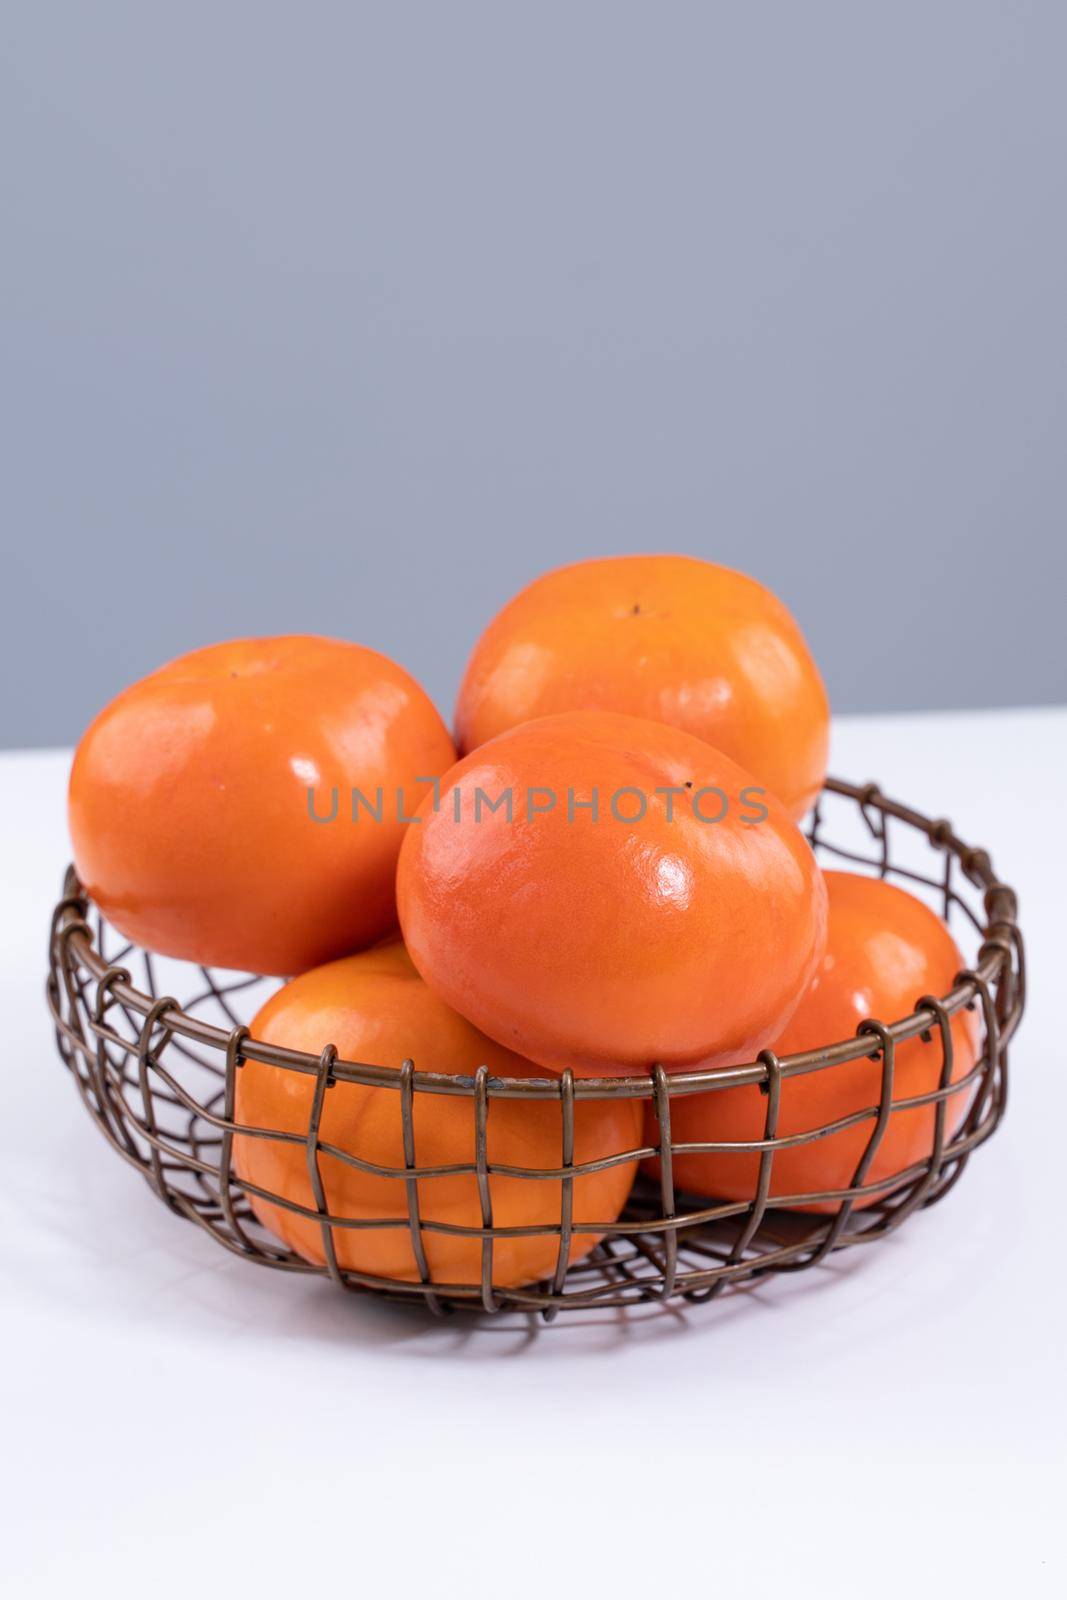 Fresh beautiful sliced sweet persimmon kaki isolated on white kitchen table with gray blue background, Chinese lunar new year design concept, close up.